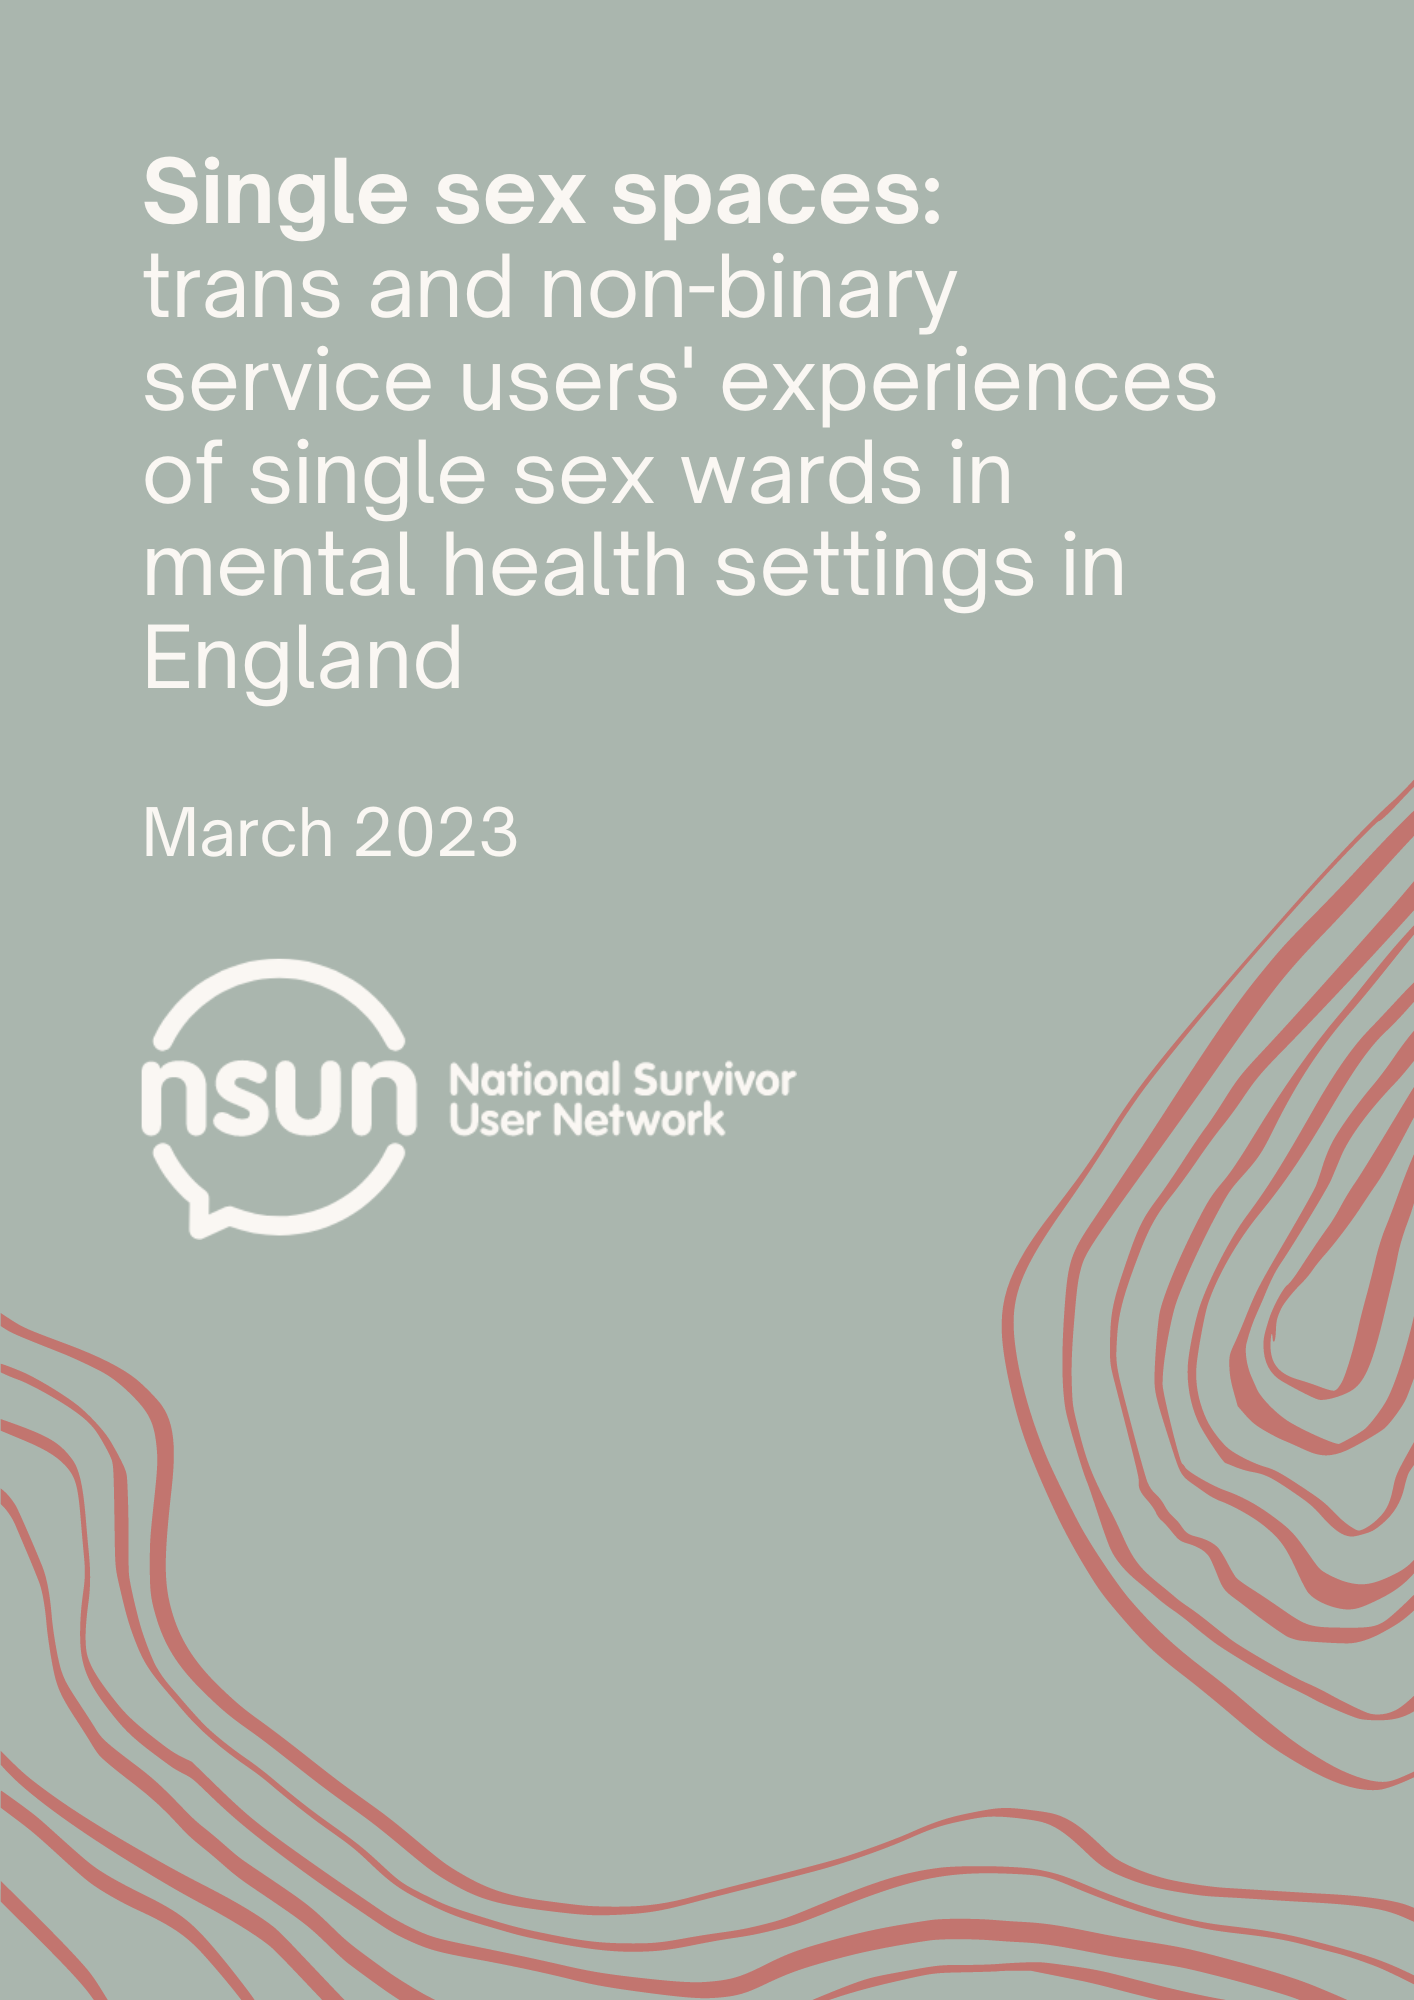 A screenshot of the title page of the report. White text on a light sage green background with abstract line drawings in the bottom left and right corners. The text reads:

"Single sex spaces: trans and non-binary service users' experiences of single sex wards in mental health settings in England

March 2023

National Survivor User Network"